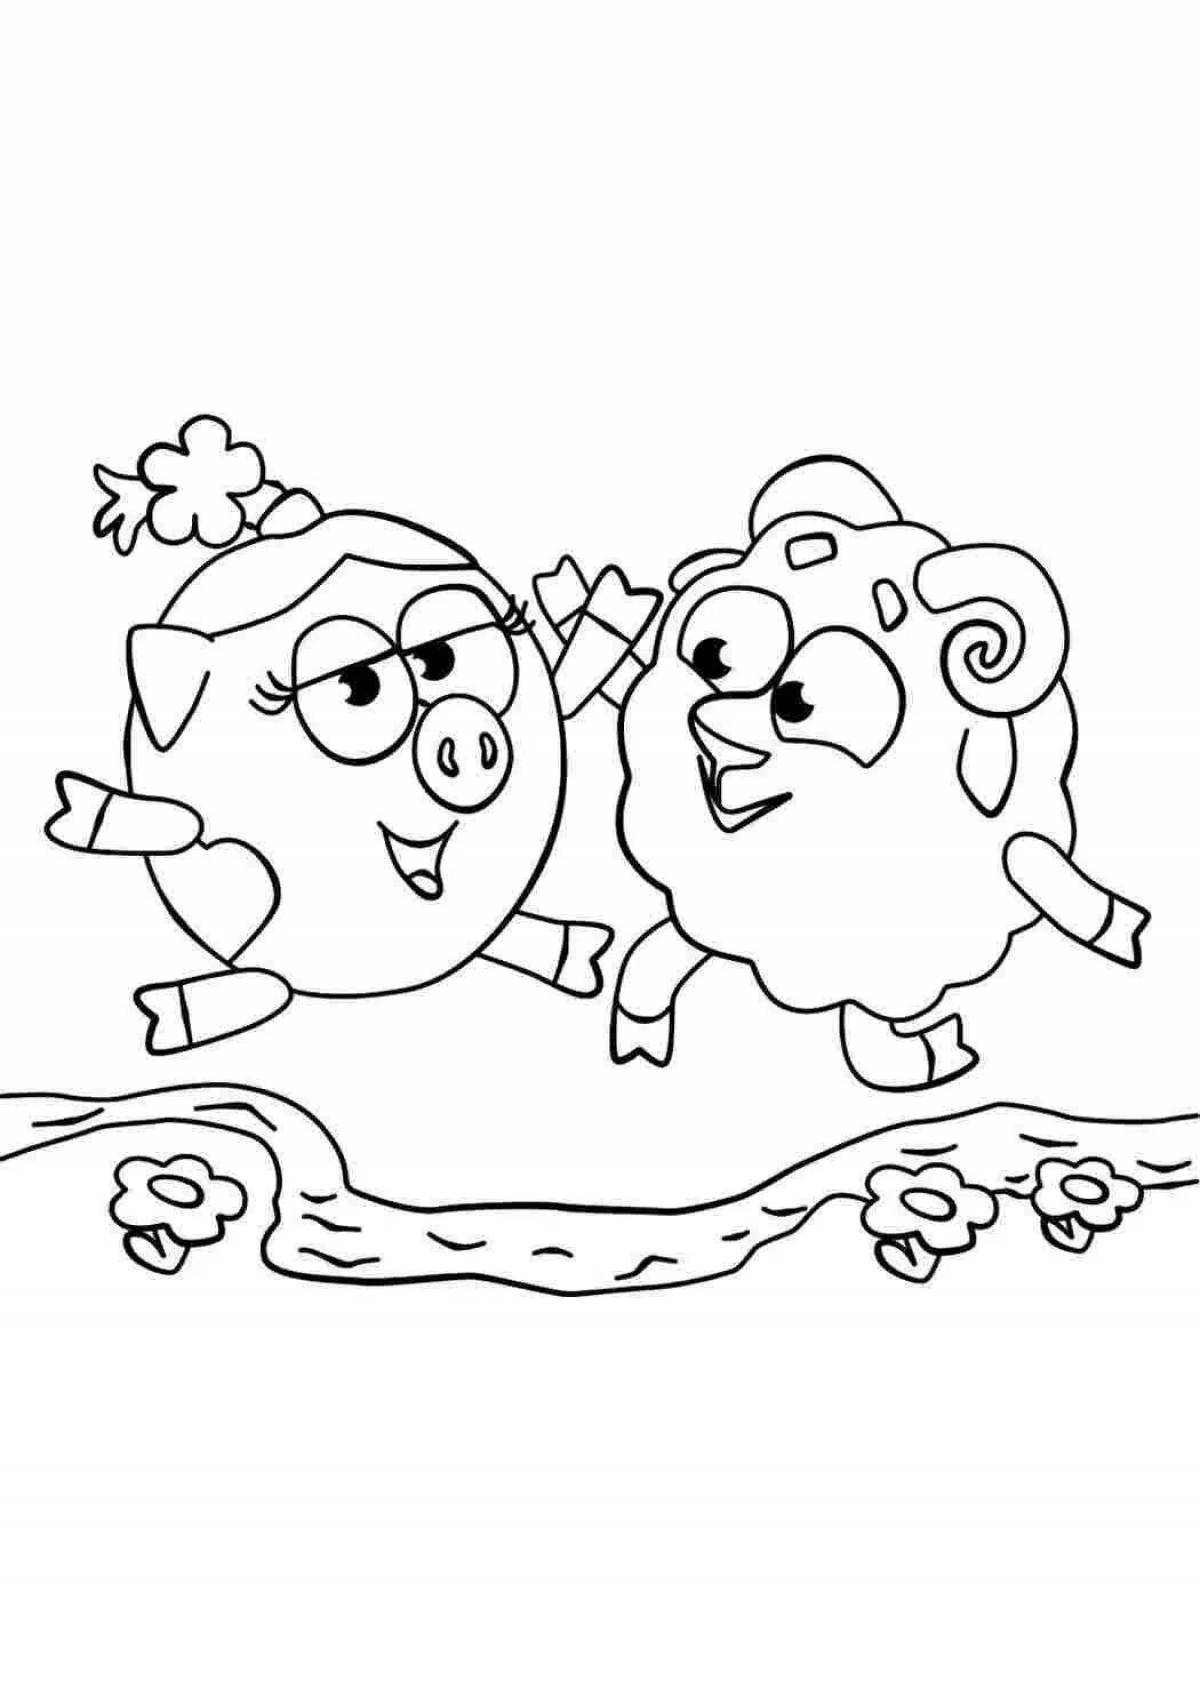 Coloring pages barash and nyusha in bright colors